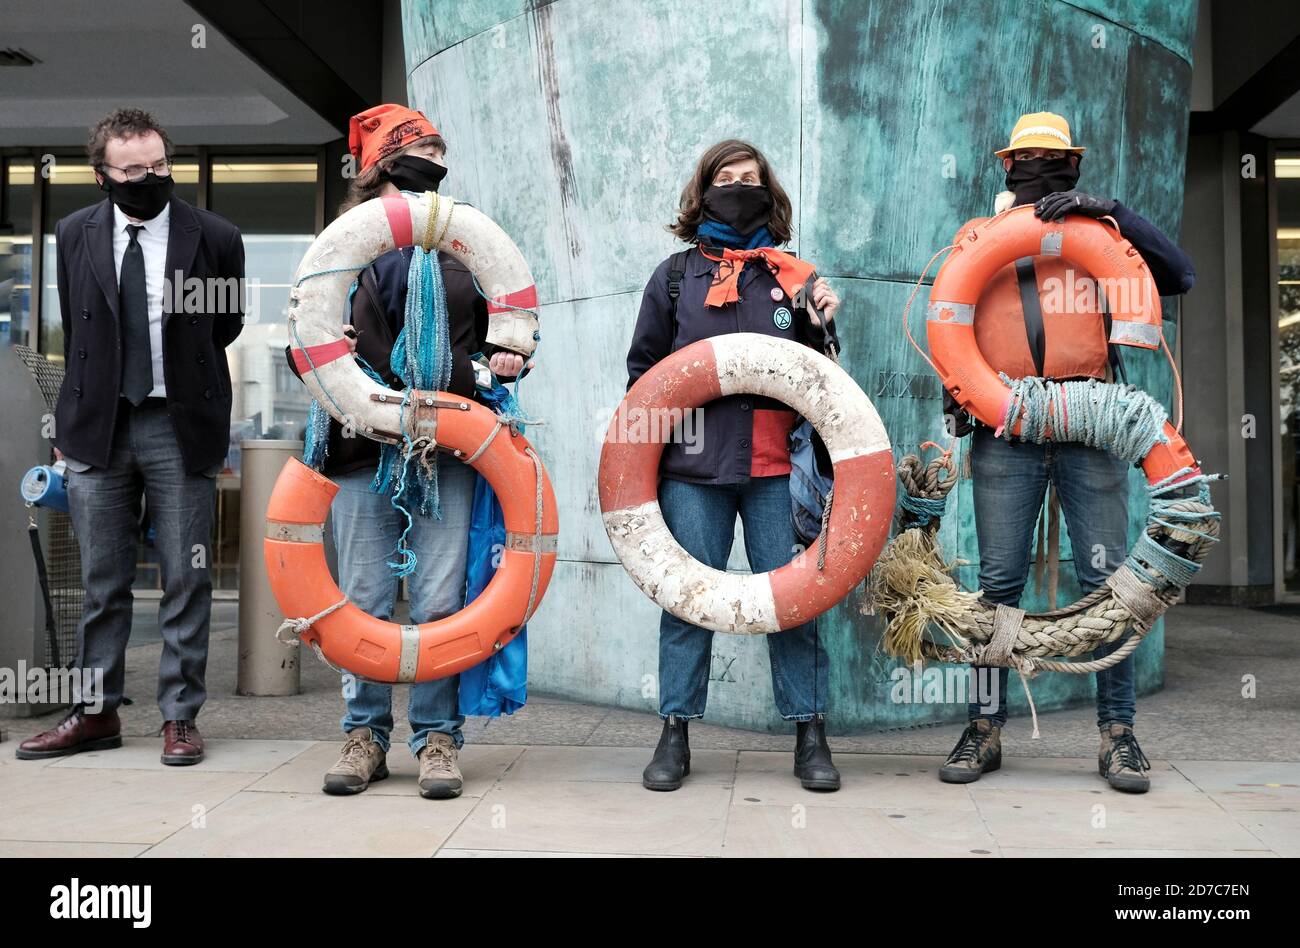 Ocean Rebellion activists protest in London to raise awareness of the Wakashio oil disaster and the use of fossil fuels in the shipping industry. Stock Photo